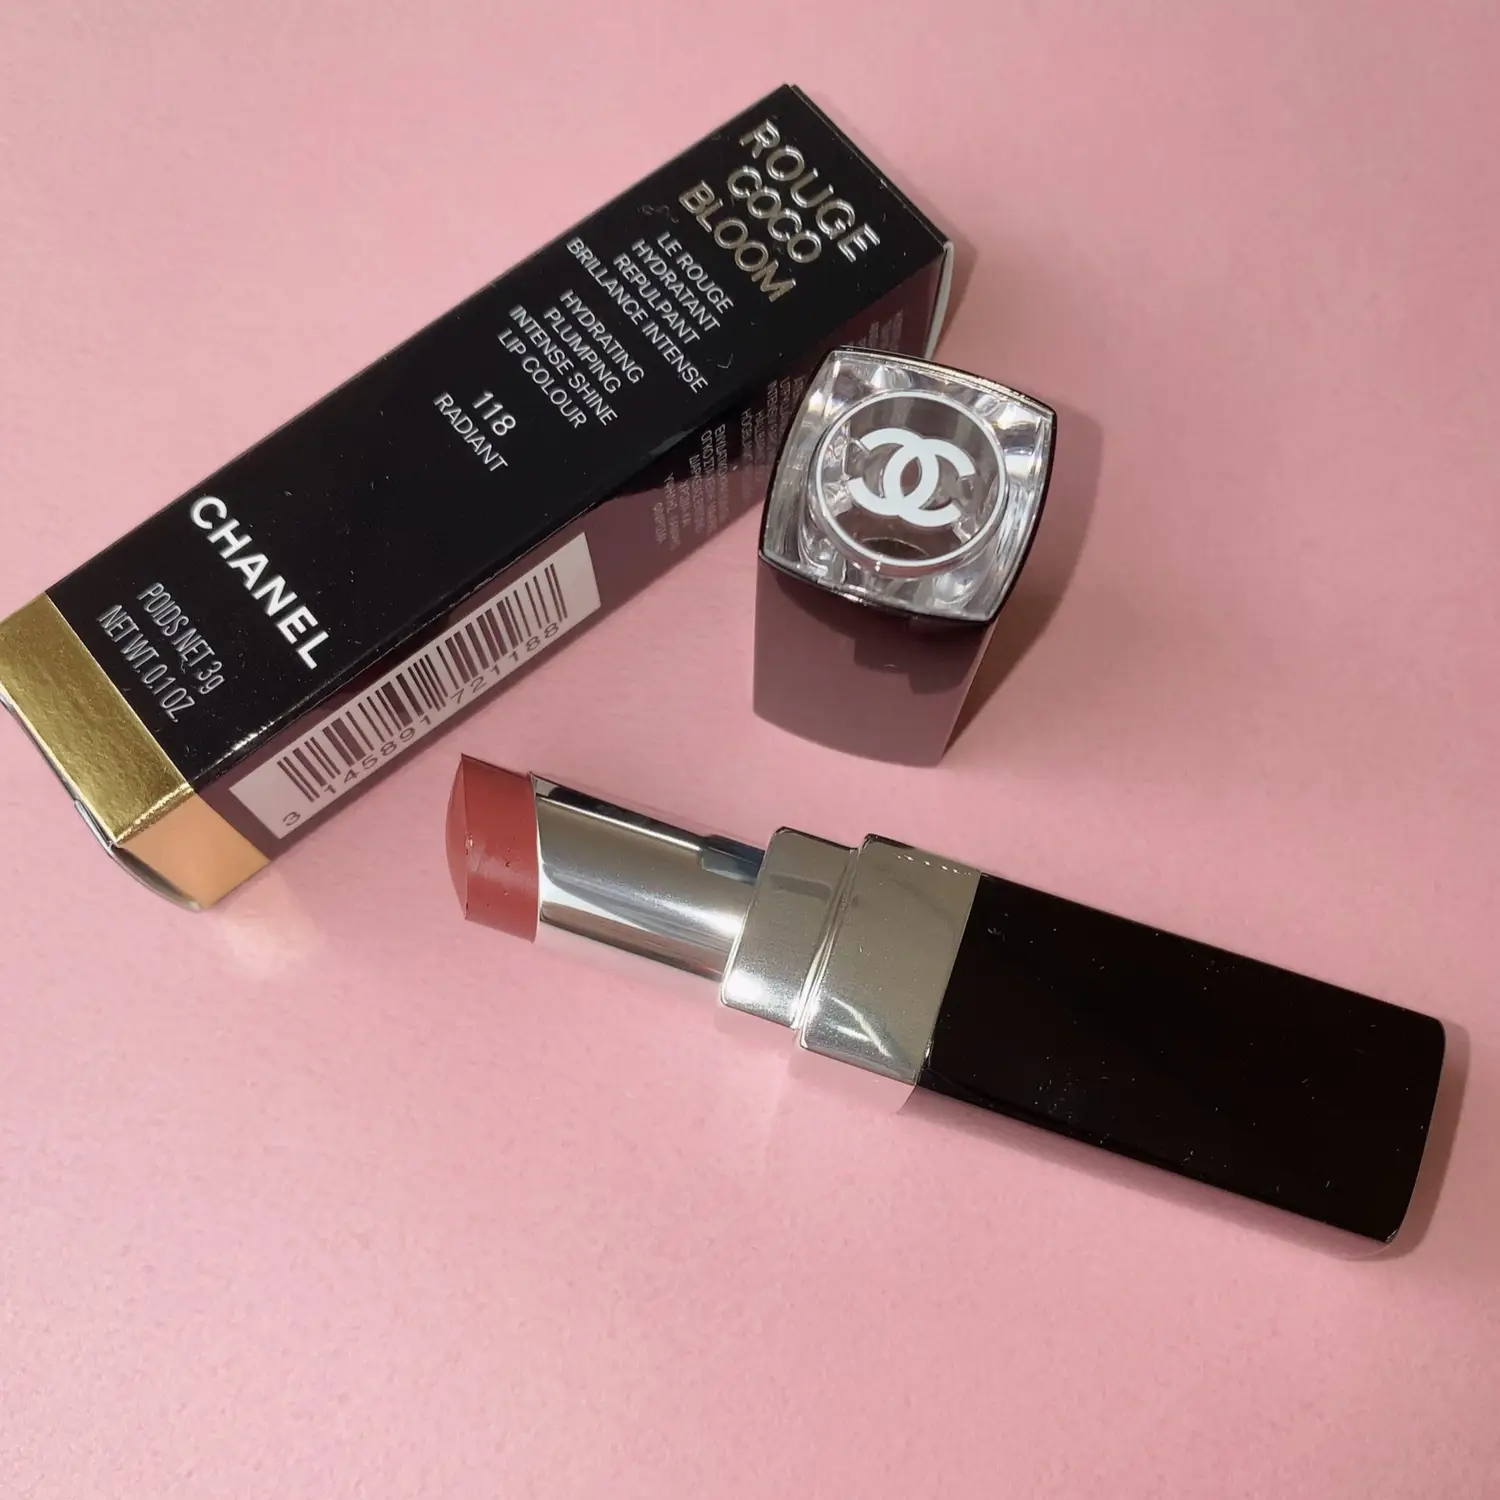 CHANEL, ROUGE COCO BLOOM HYDRATING PLUMPING INTENSE SHINE LIP COLOUR